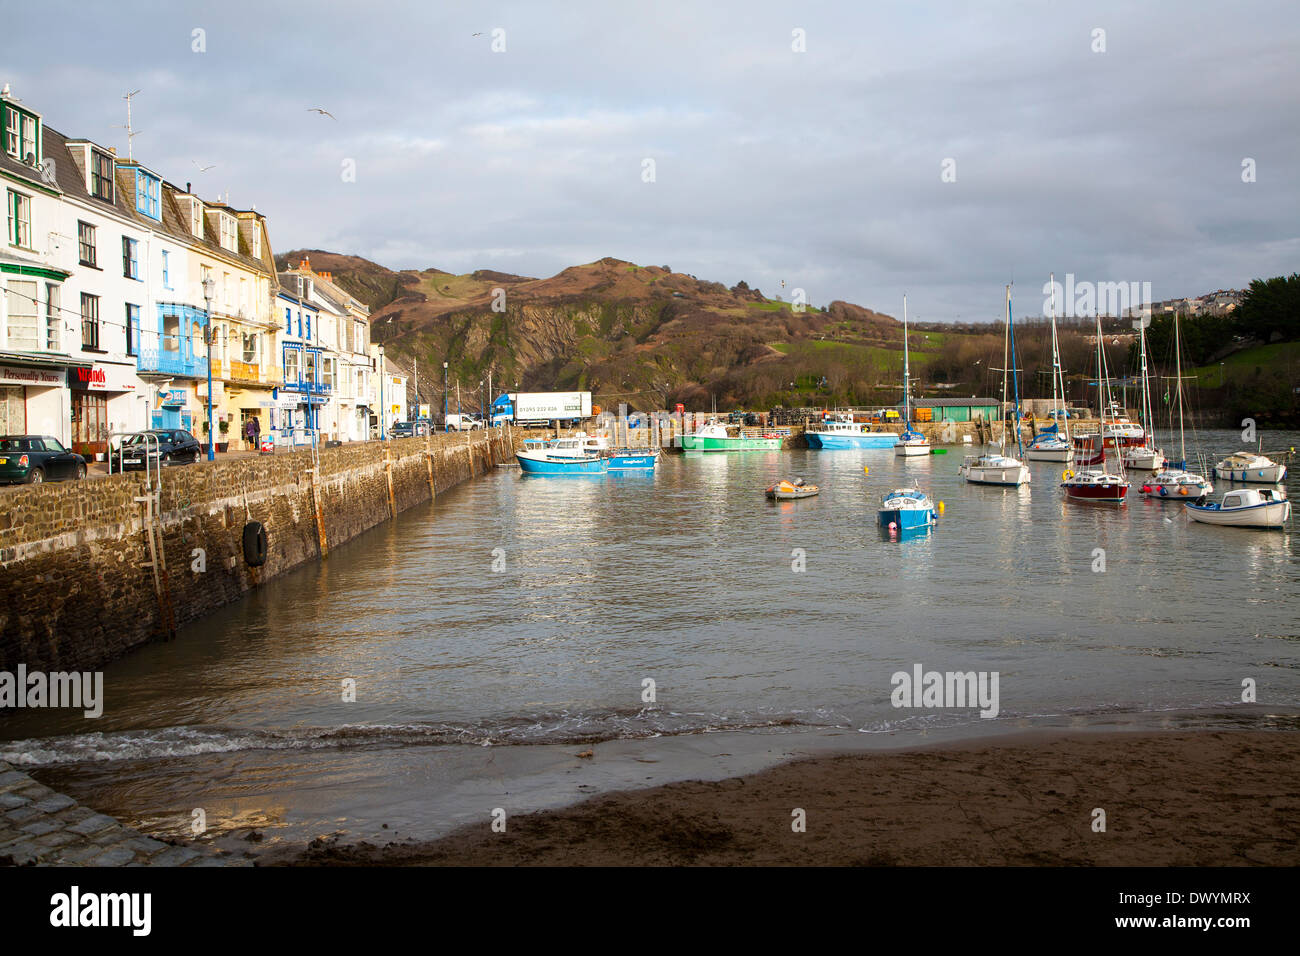 View of boats in the harbour in sunshine of winter afternoon, Ilfracombe, north Devon, England Stock Photo